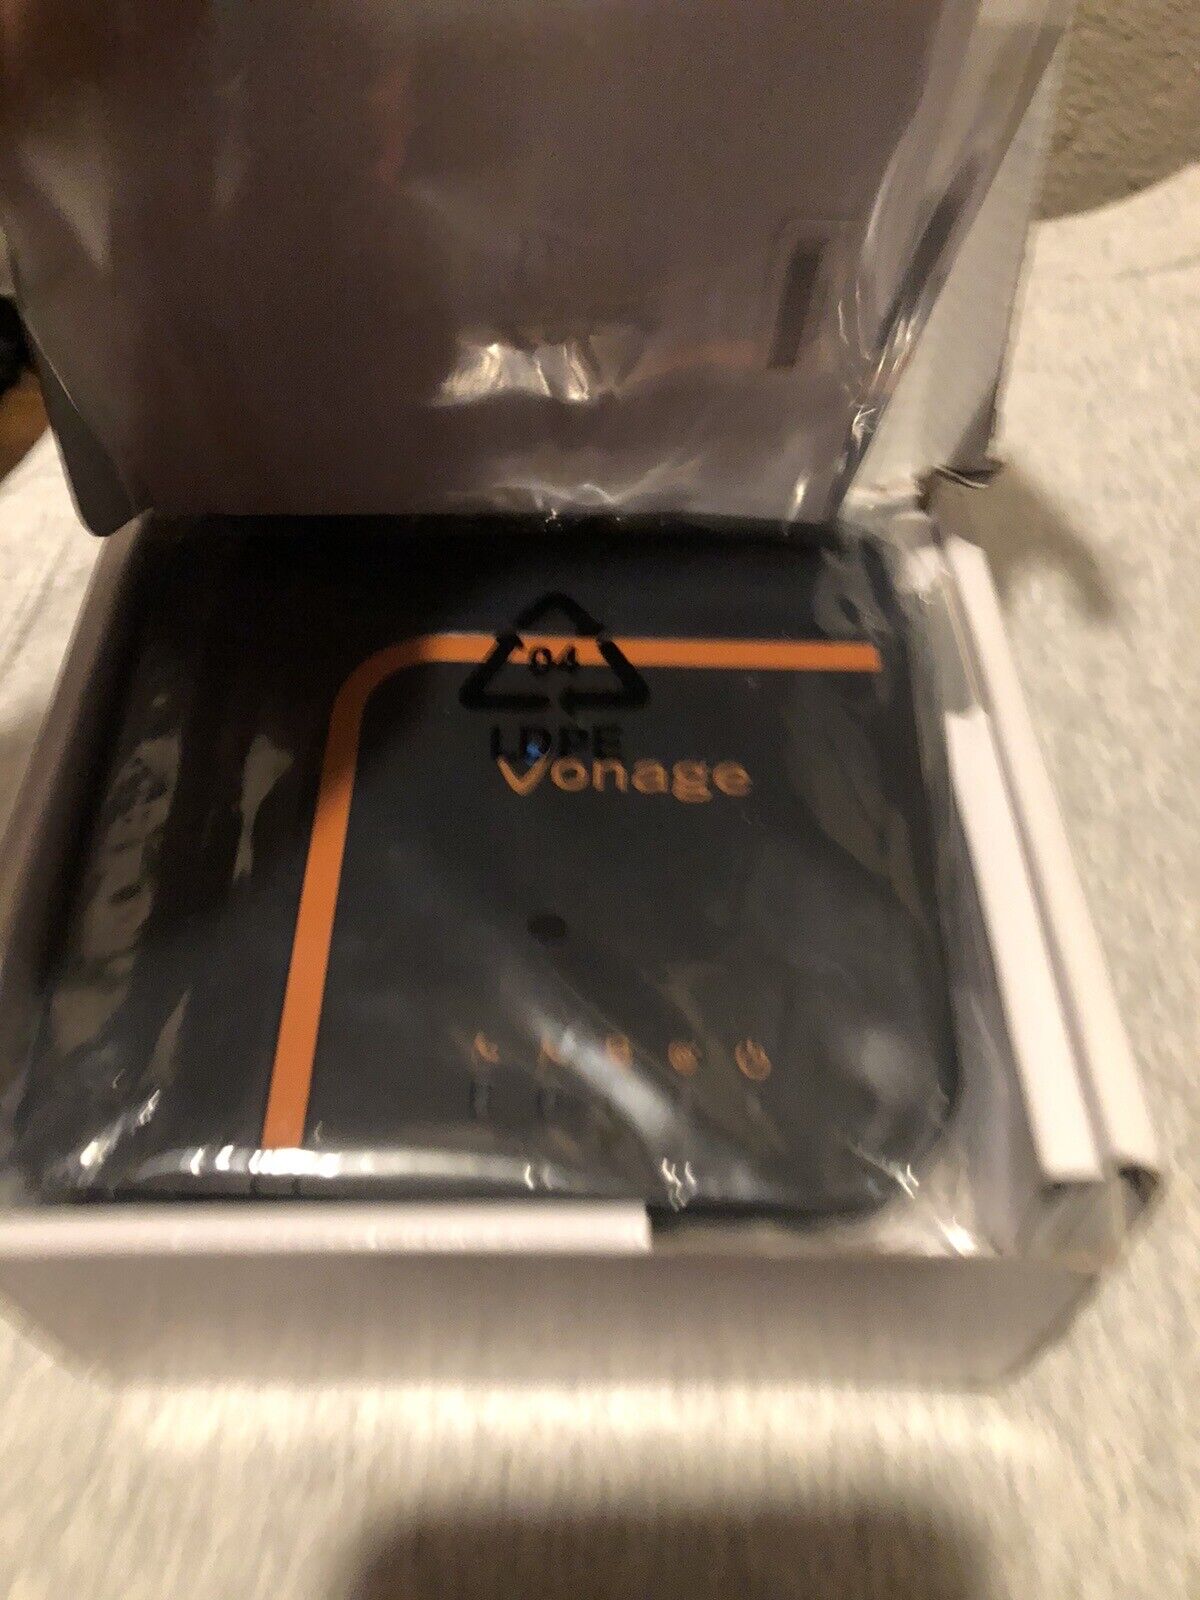 Vonage Digital Phone Service Adapter And Cord Model VDV23-VD